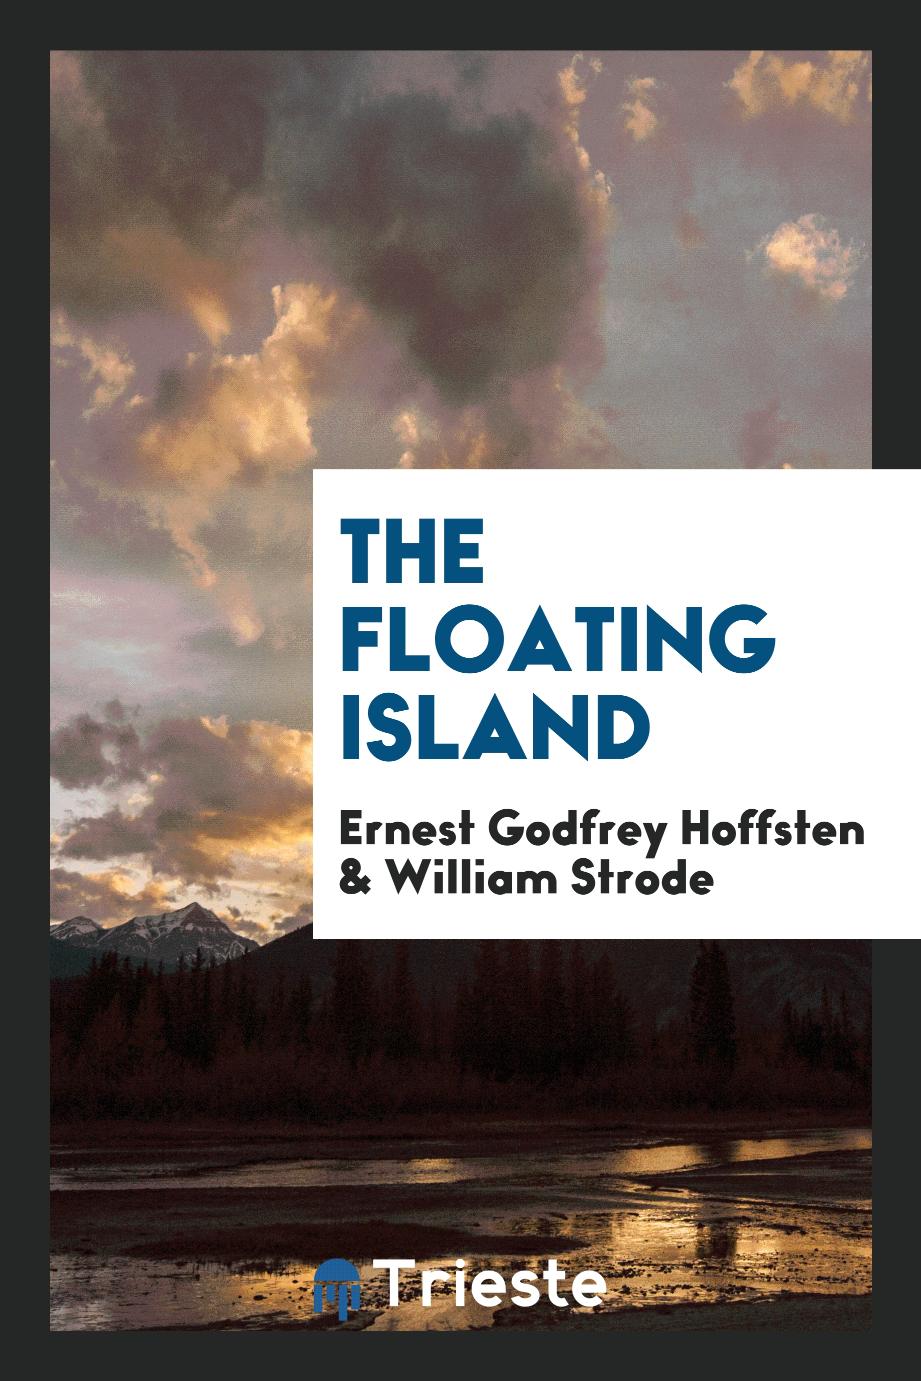 The floating island